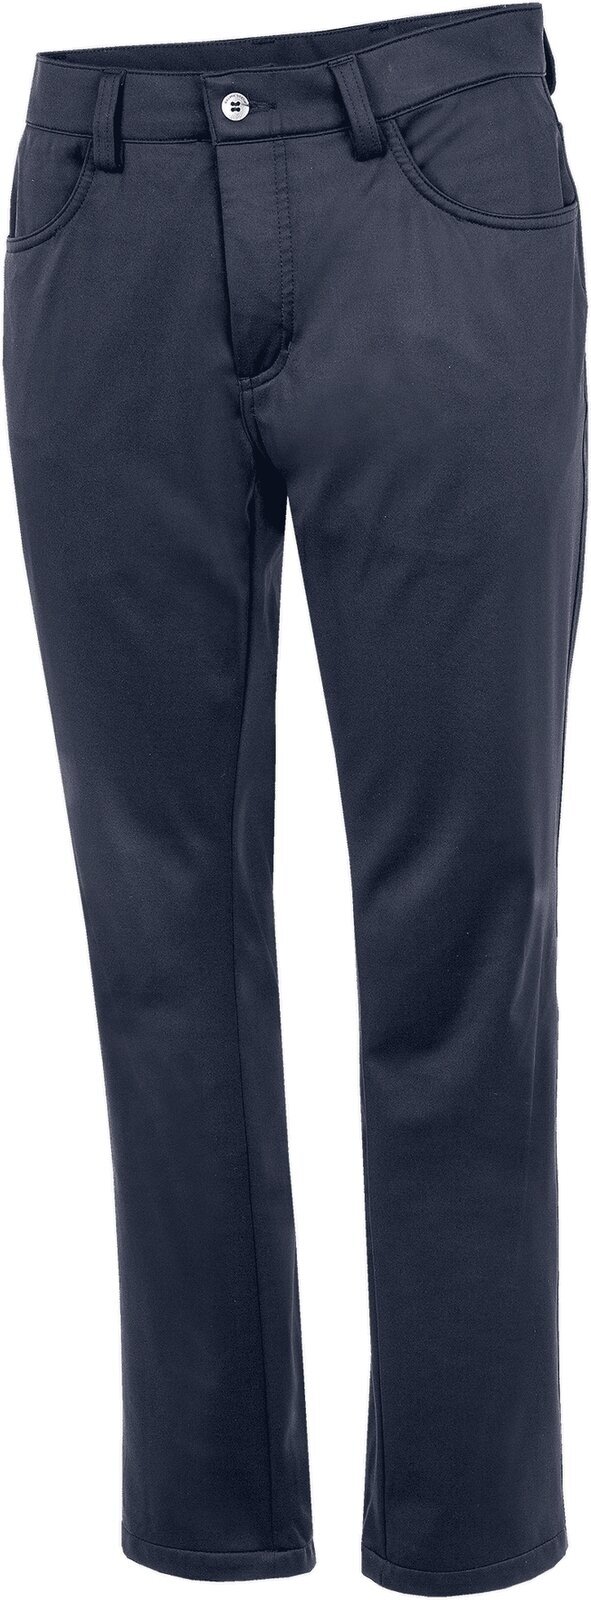 Trousers Galvin Green Lane MensWindproof And Water Repellent Pants Navy 36/32